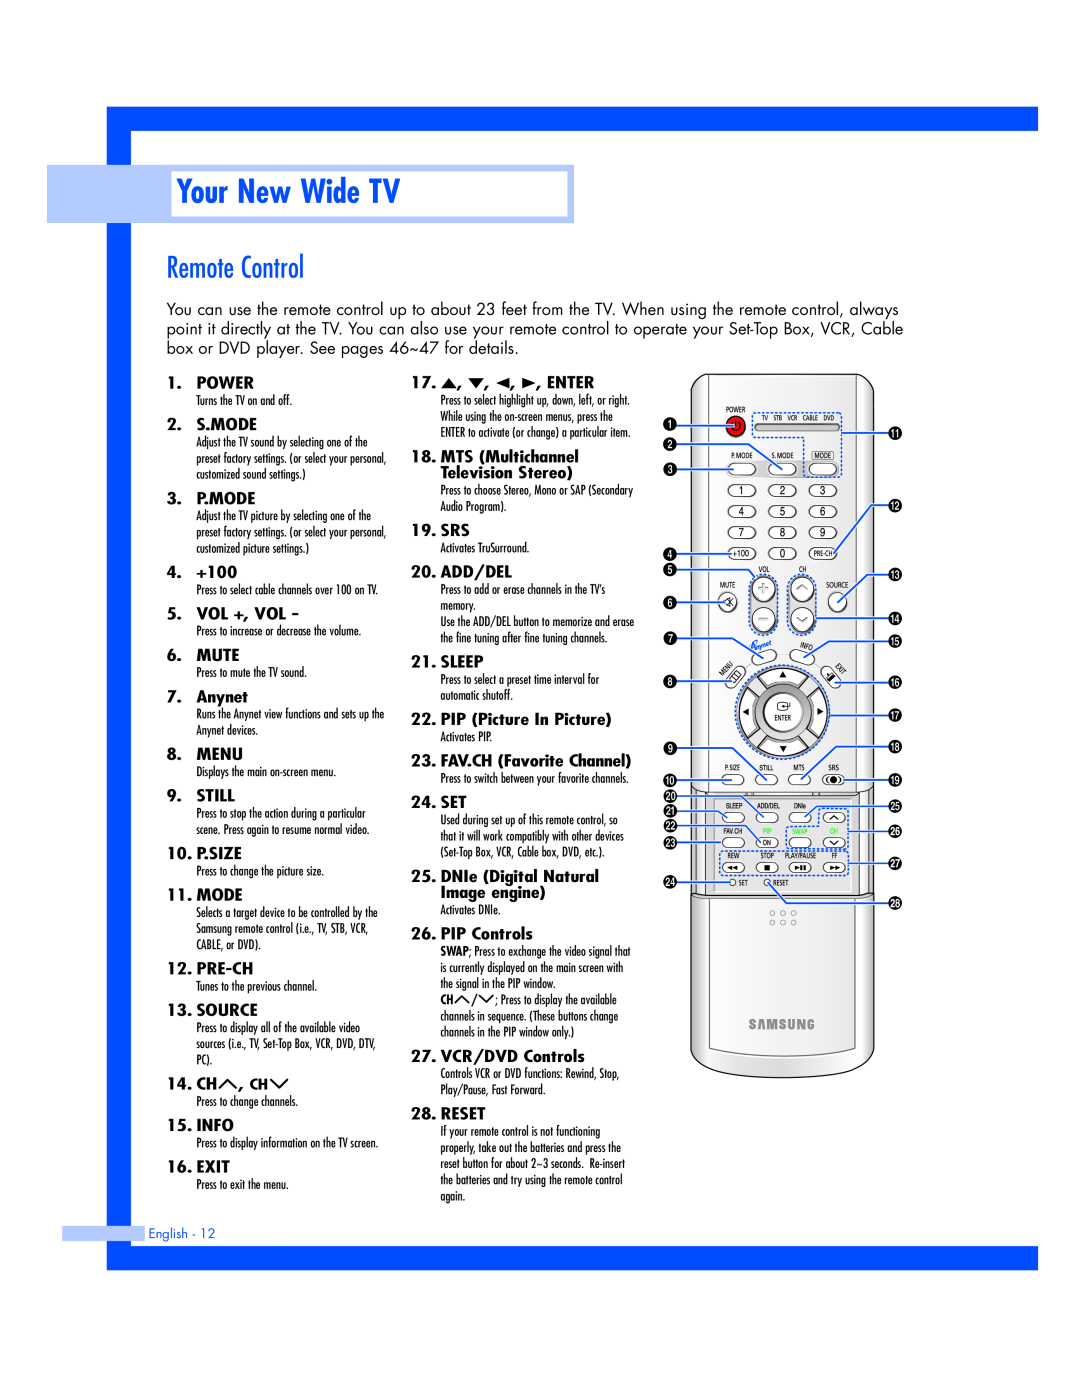 Samsung HL-P4674W instruction manual Remote Control, Your New Wide TV 